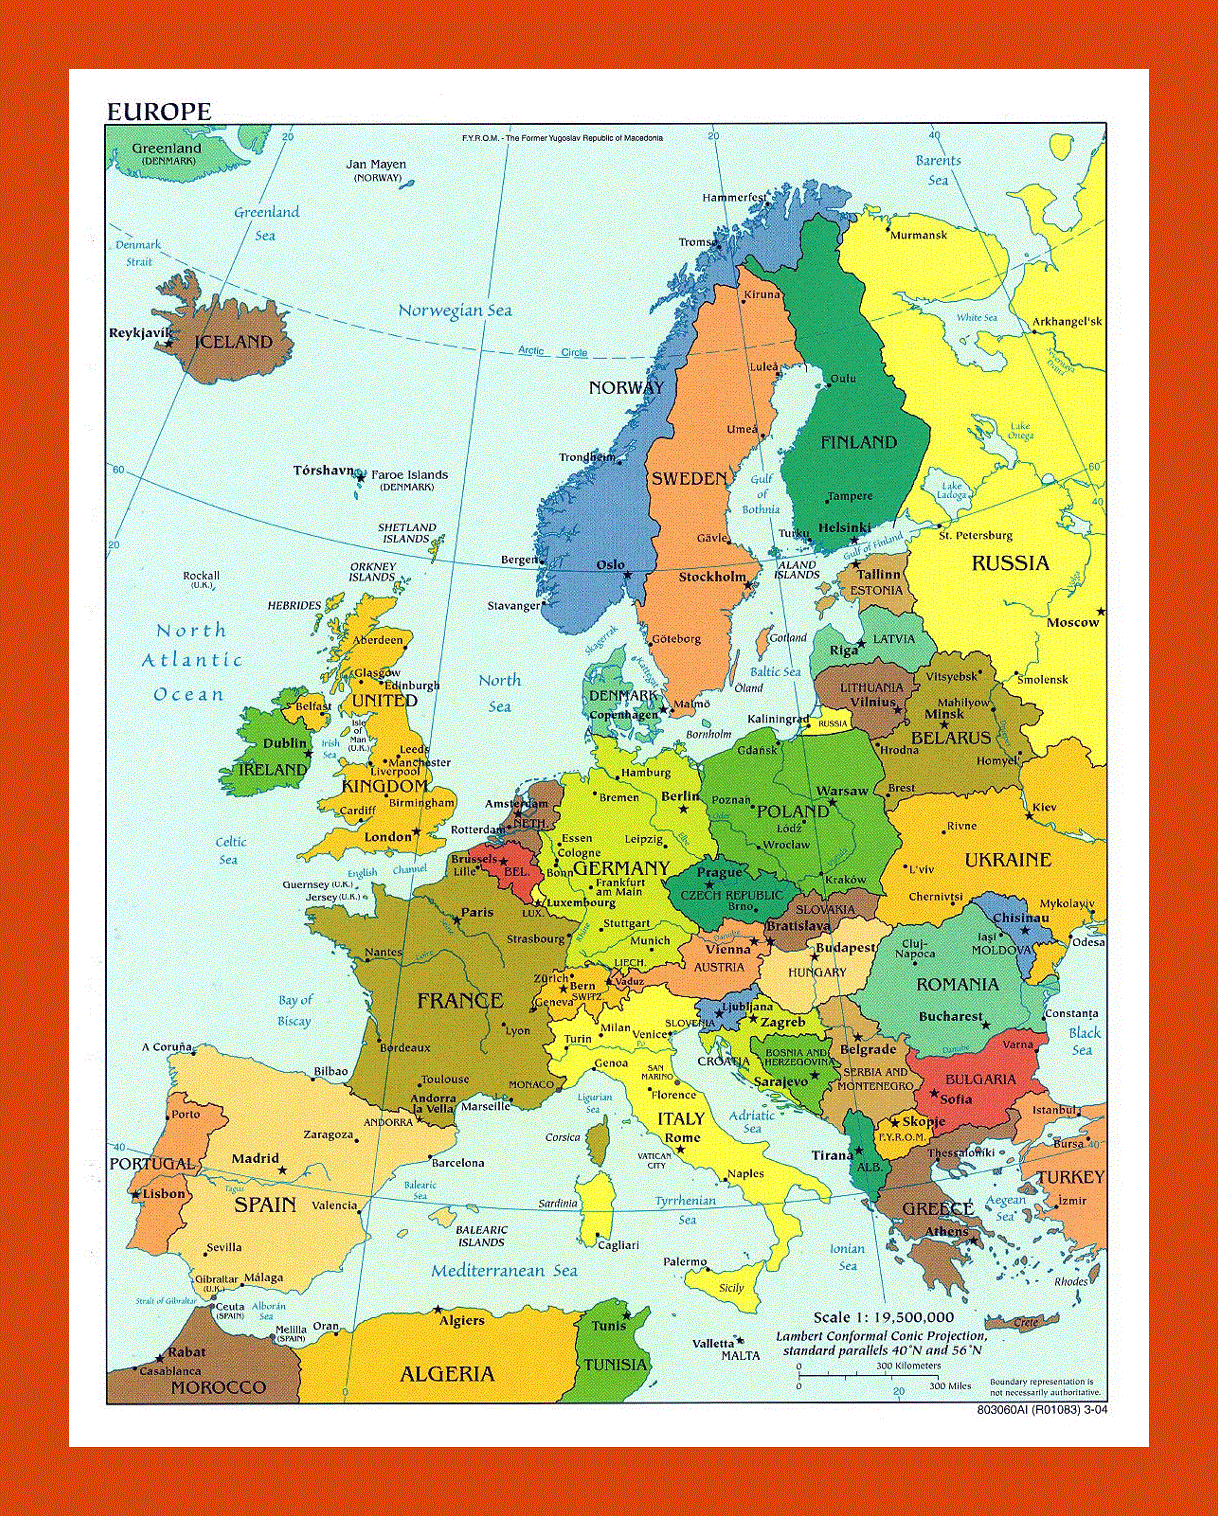 Political map of Europe - 2004